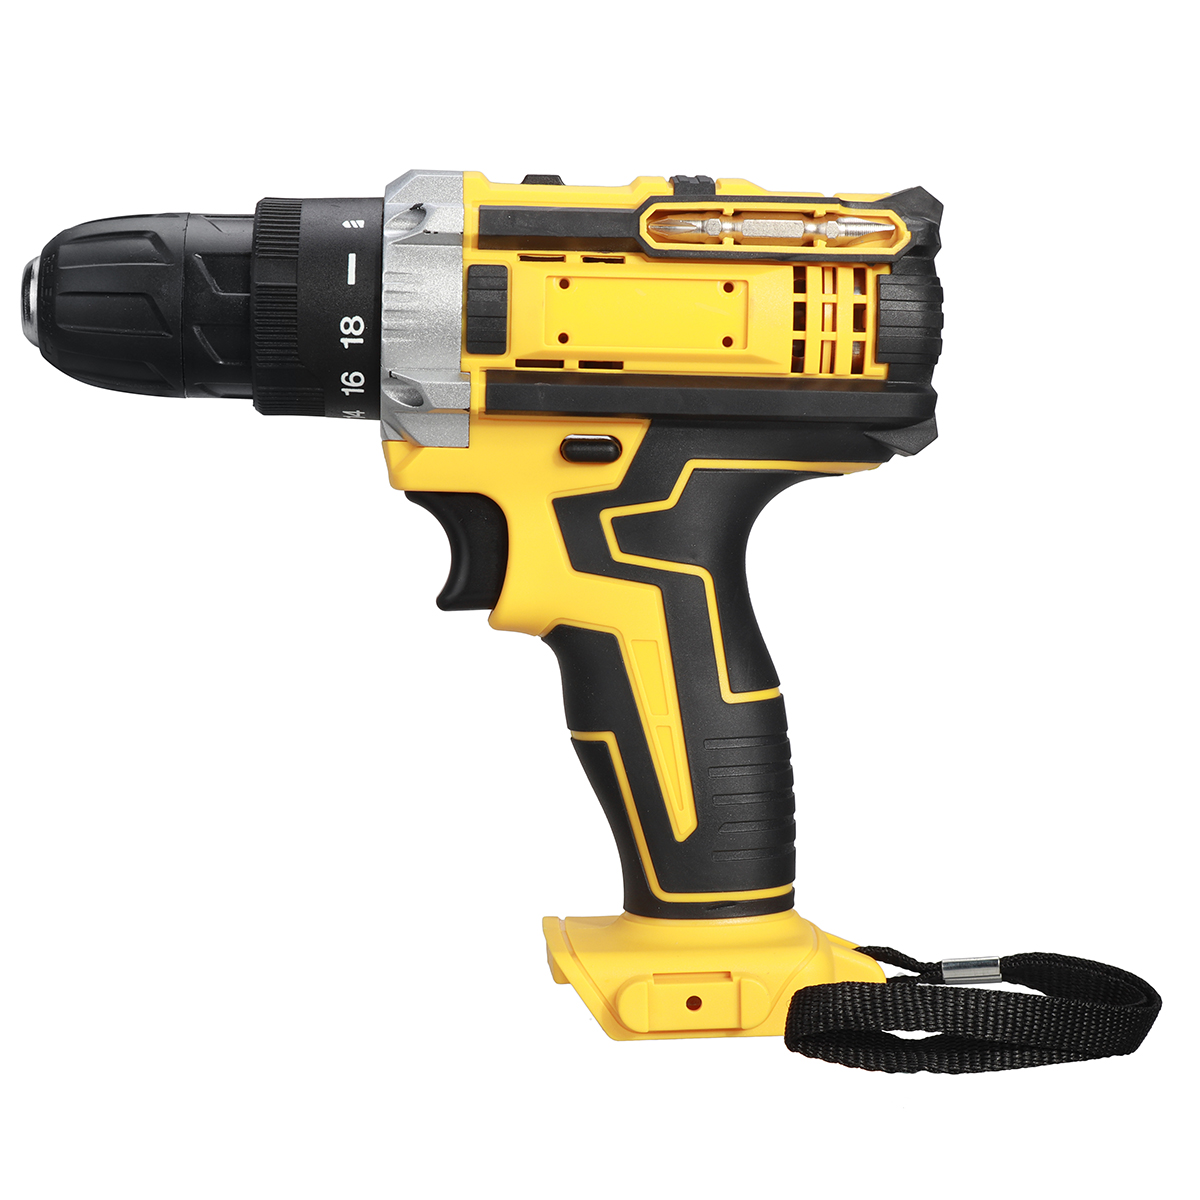 21V-Wireless-Rechargeable-Impact-Hammer-Drill-Electric-Screwdriver-W-Battery--Storage-Case-Screwing--1858203-14